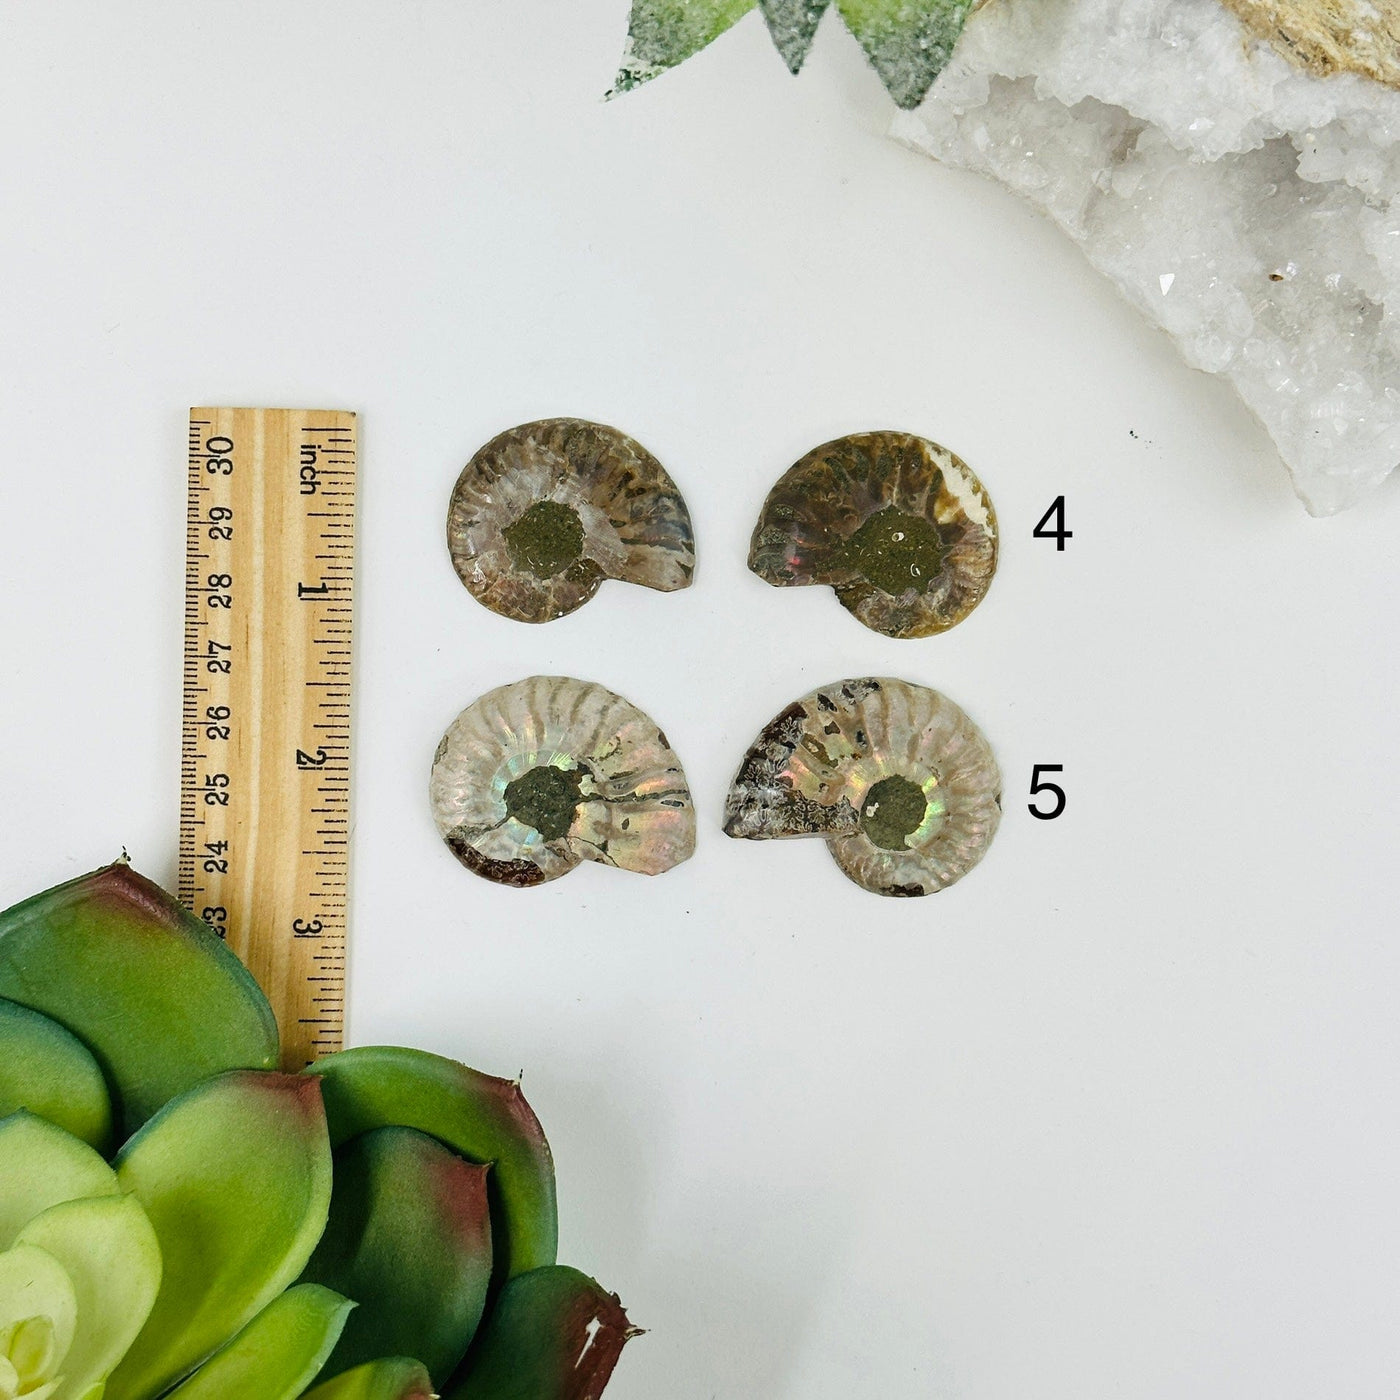 2 ammonite pairs next to a ruler for size reference